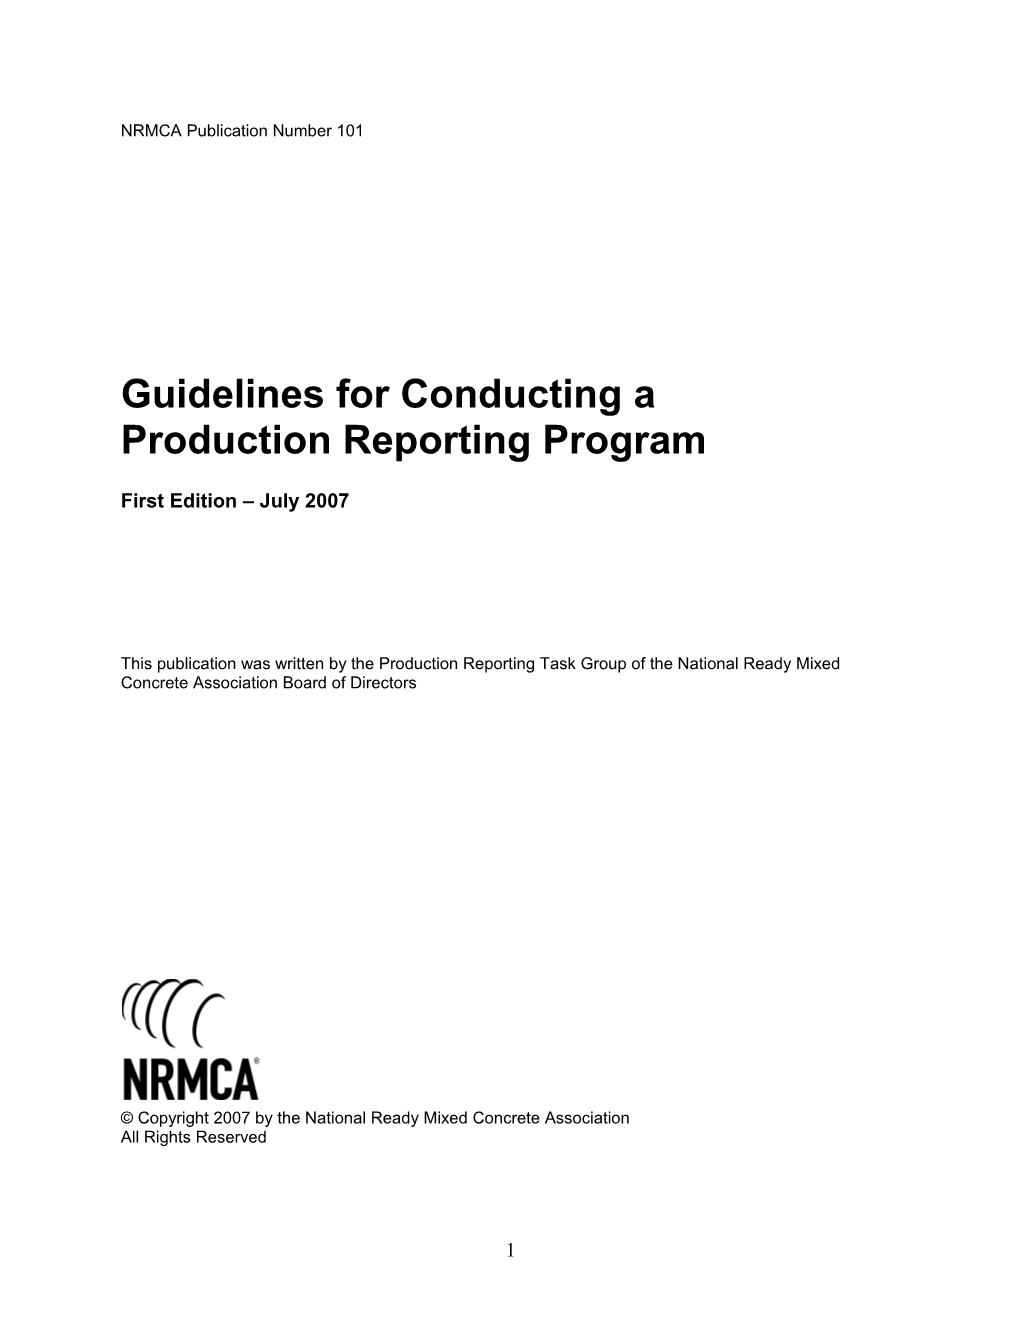 Guidelines for Conducting A